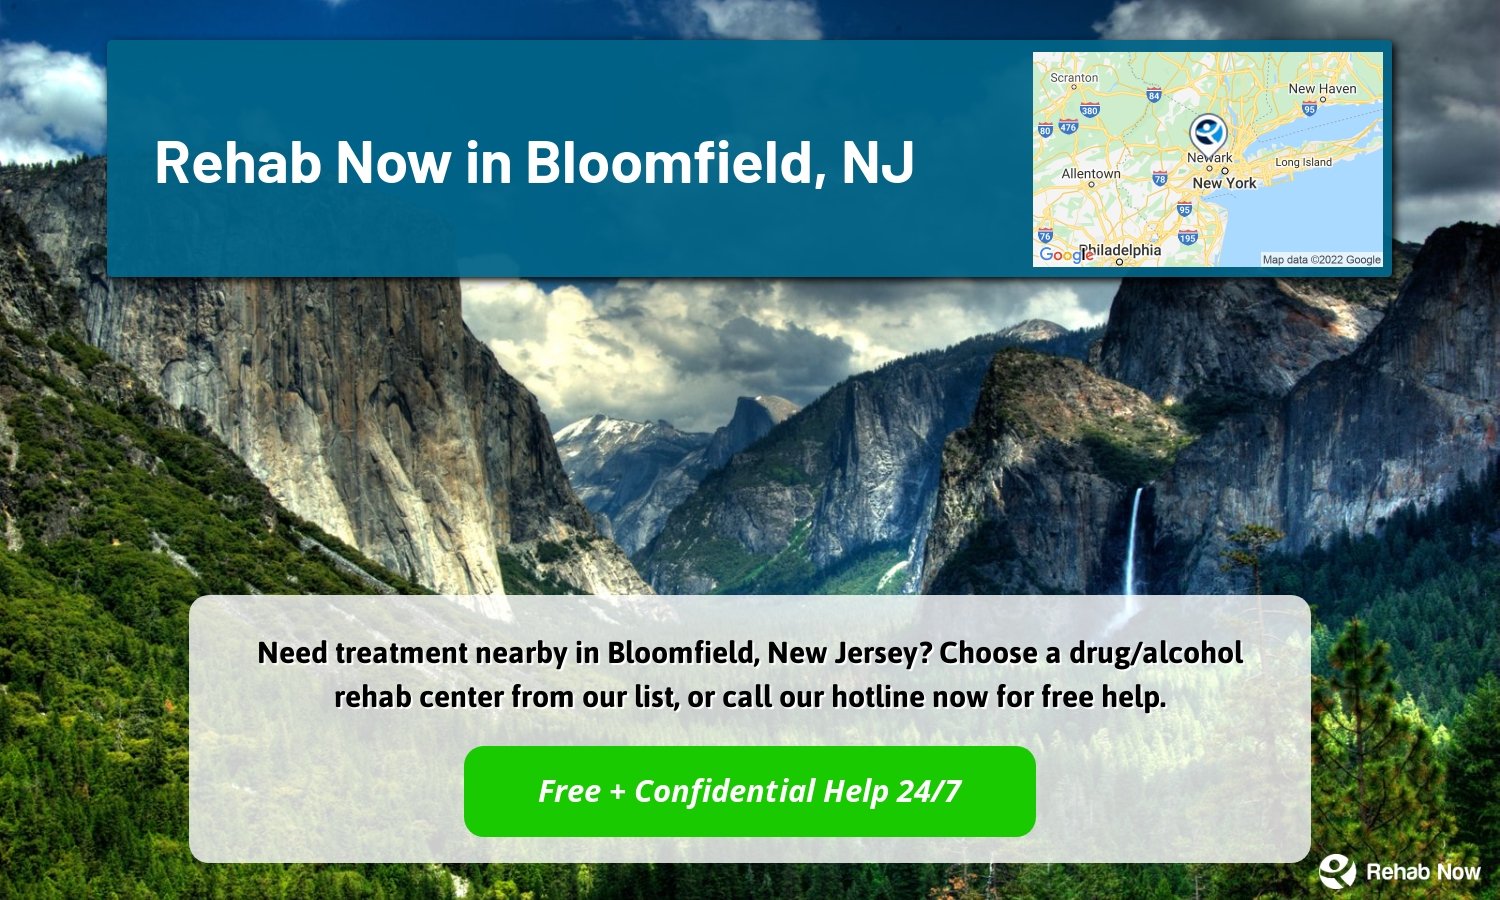 Need treatment nearby in Bloomfield, New Jersey? Choose a drug/alcohol rehab center from our list, or call our hotline now for free help.